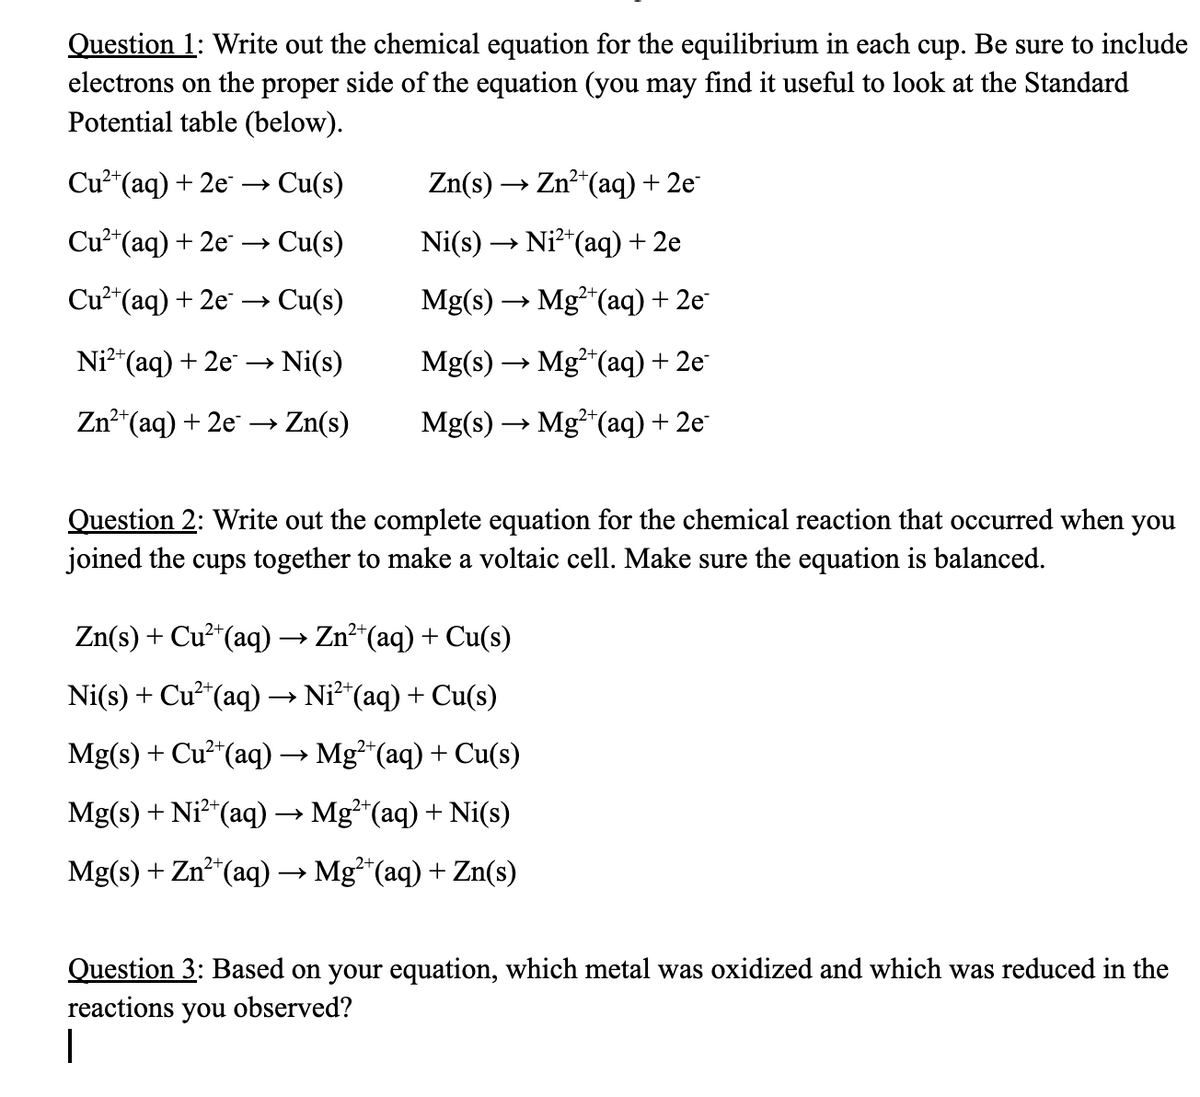 Question 1: Write out the chemical equation for the equilibrium in each cup. Be sure to include
electrons on the proper side of the equation (you may find it useful to look at the Standard
Potential table (below).
Cu²+ (aq) + 2e → Cu(s)
Cu²+ (aq) + 2e → Cu(s)
Cu²+ (aq) + 2e →→ Cu(s)
Ni²+ (aq) + 2e →→→ Ni(s)
2+
Zn²+ (aq) + 2e → > Zn(s)
Zn(s) → Zn²+ (aq) + 2e-
Ni(s) → Ni²+ (aq) + 2e
Mg(s) → Mg2+ (aq) + 2e
Mg(s) → Mg2+ (aq) + 2e
Mg(s) → Mg2+ (aq) + 2e
Question 2: Write out the complete equation for the chemical reaction that occurred when you
joined the cups together to make a voltaic cell. Make sure the equation is balanced.
Zn(s) + Cu²+ (aq) → Zn²+ (aq) + Cu(s)
Ni(s) + Cu²+ (aq) → Ni²¹(aq) + Cu(s)
Mg(s) + Cu²+ (aq) → Mg²+(aq) + Cu(s)
Mg(s) + Ni²+ (aq) → Mg²+(aq) + Ni(s)
2+
Mg(s) + Zn²+ (aq) → Mg²+ (aq) + Zn(s)
Question 3: Based on your equation, which metal was oxidized and which was reduced in the
reactions you observed?
1